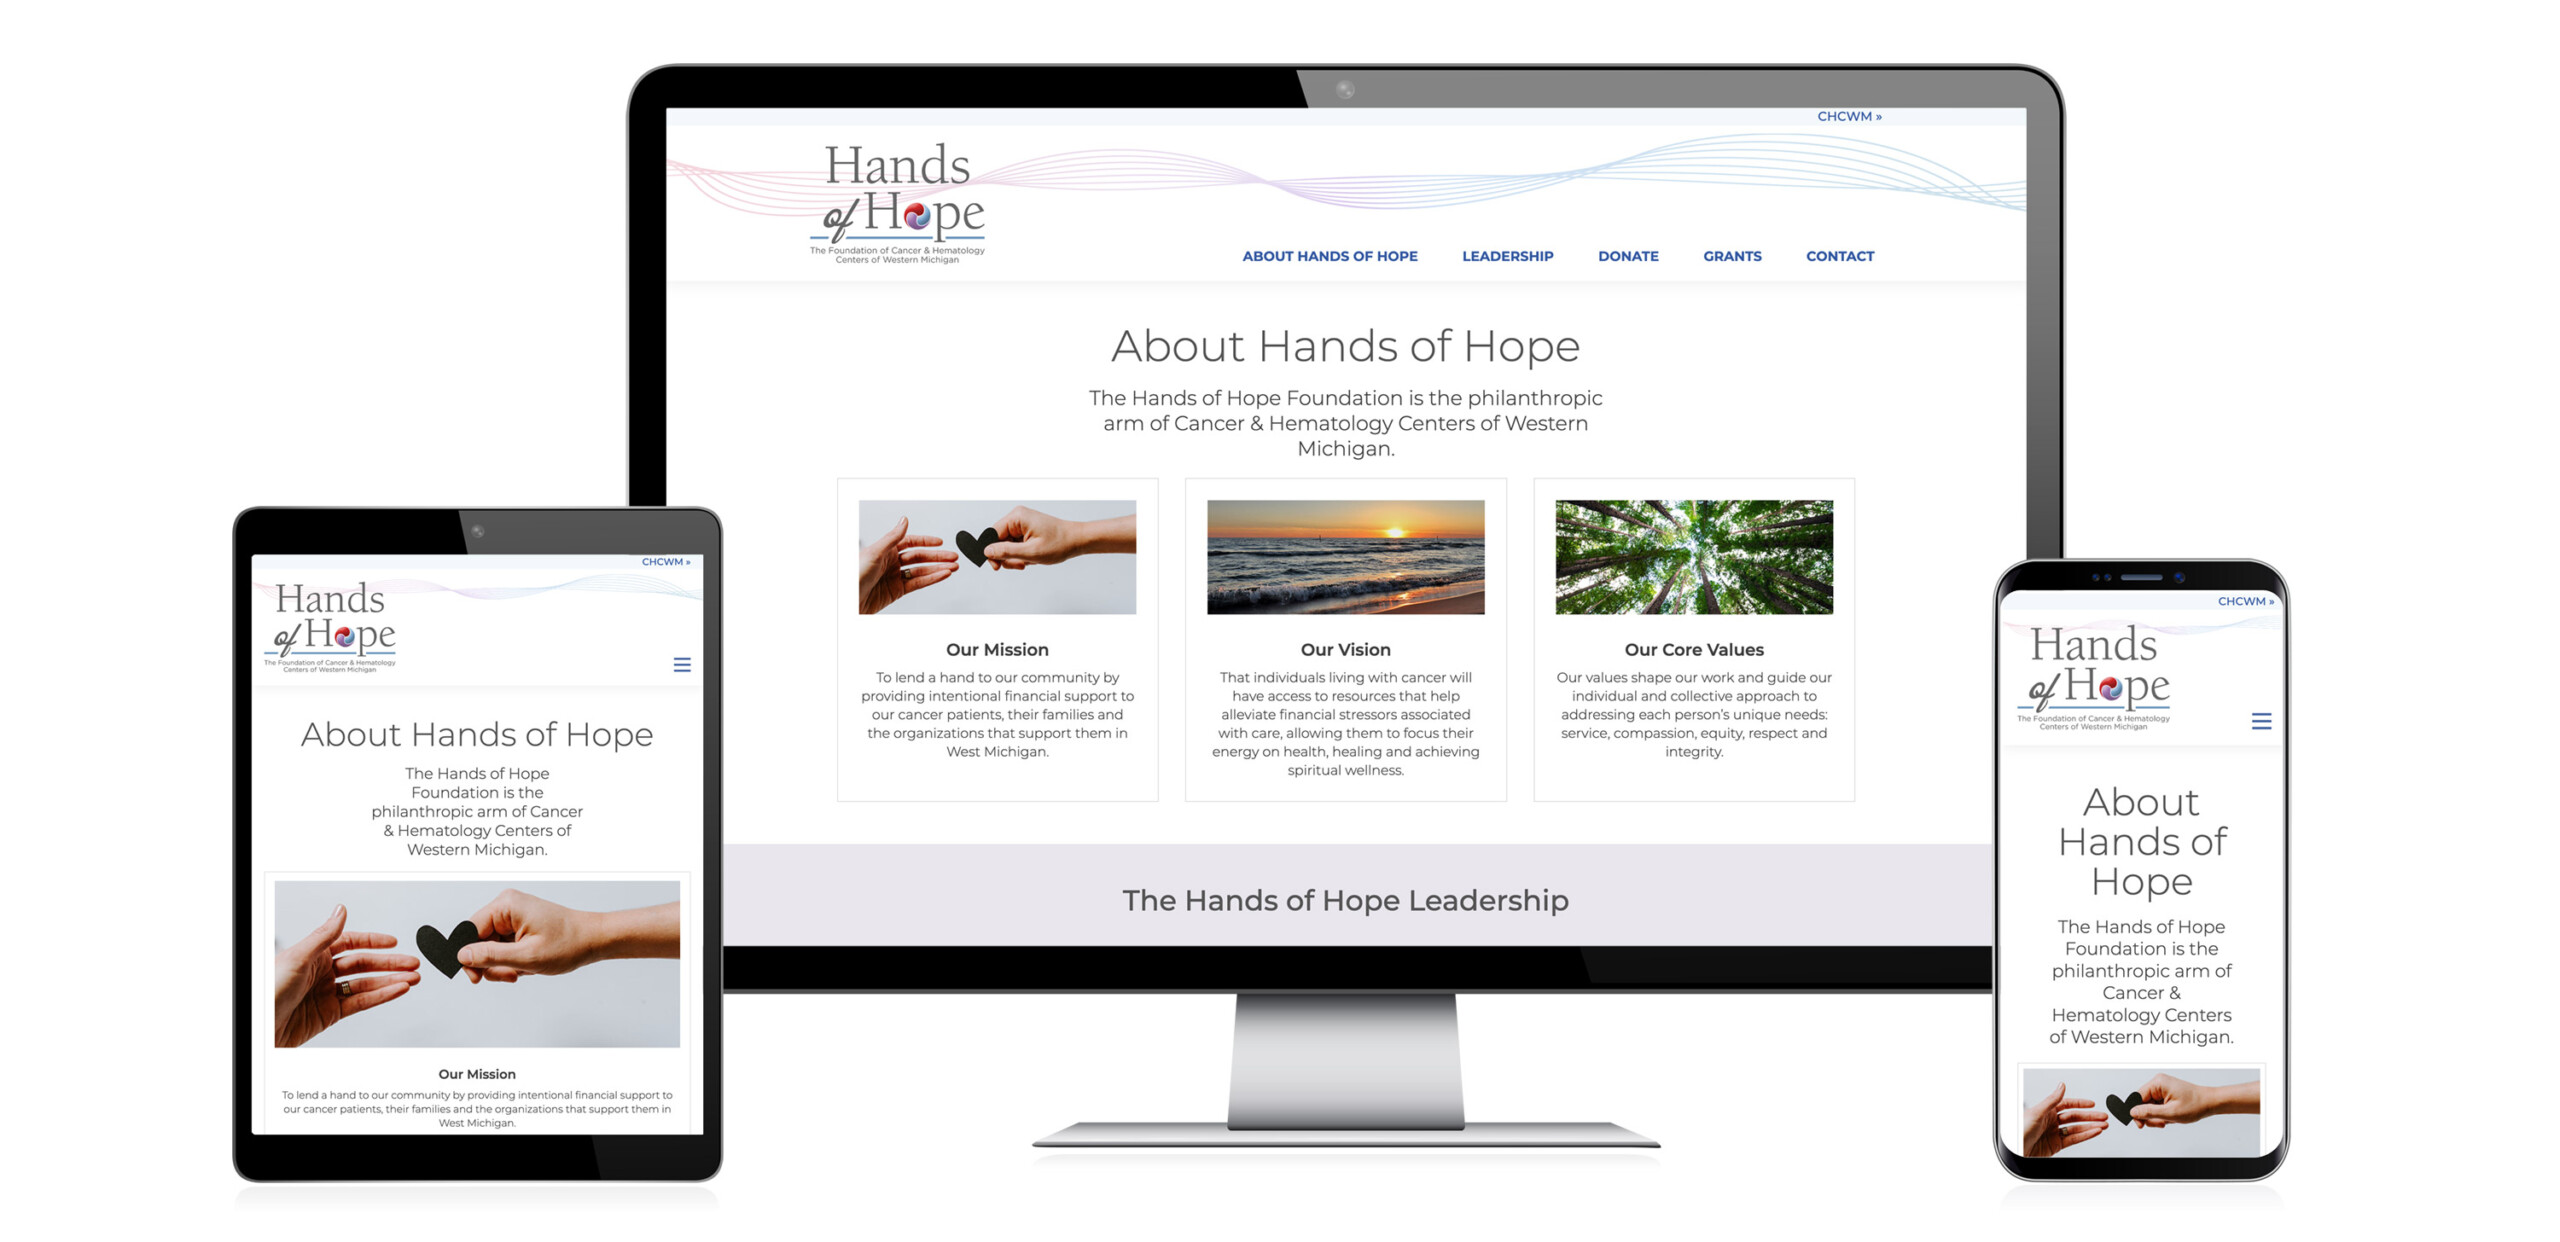 Home page of the Hands of Hope Foundation website seen on various devices.